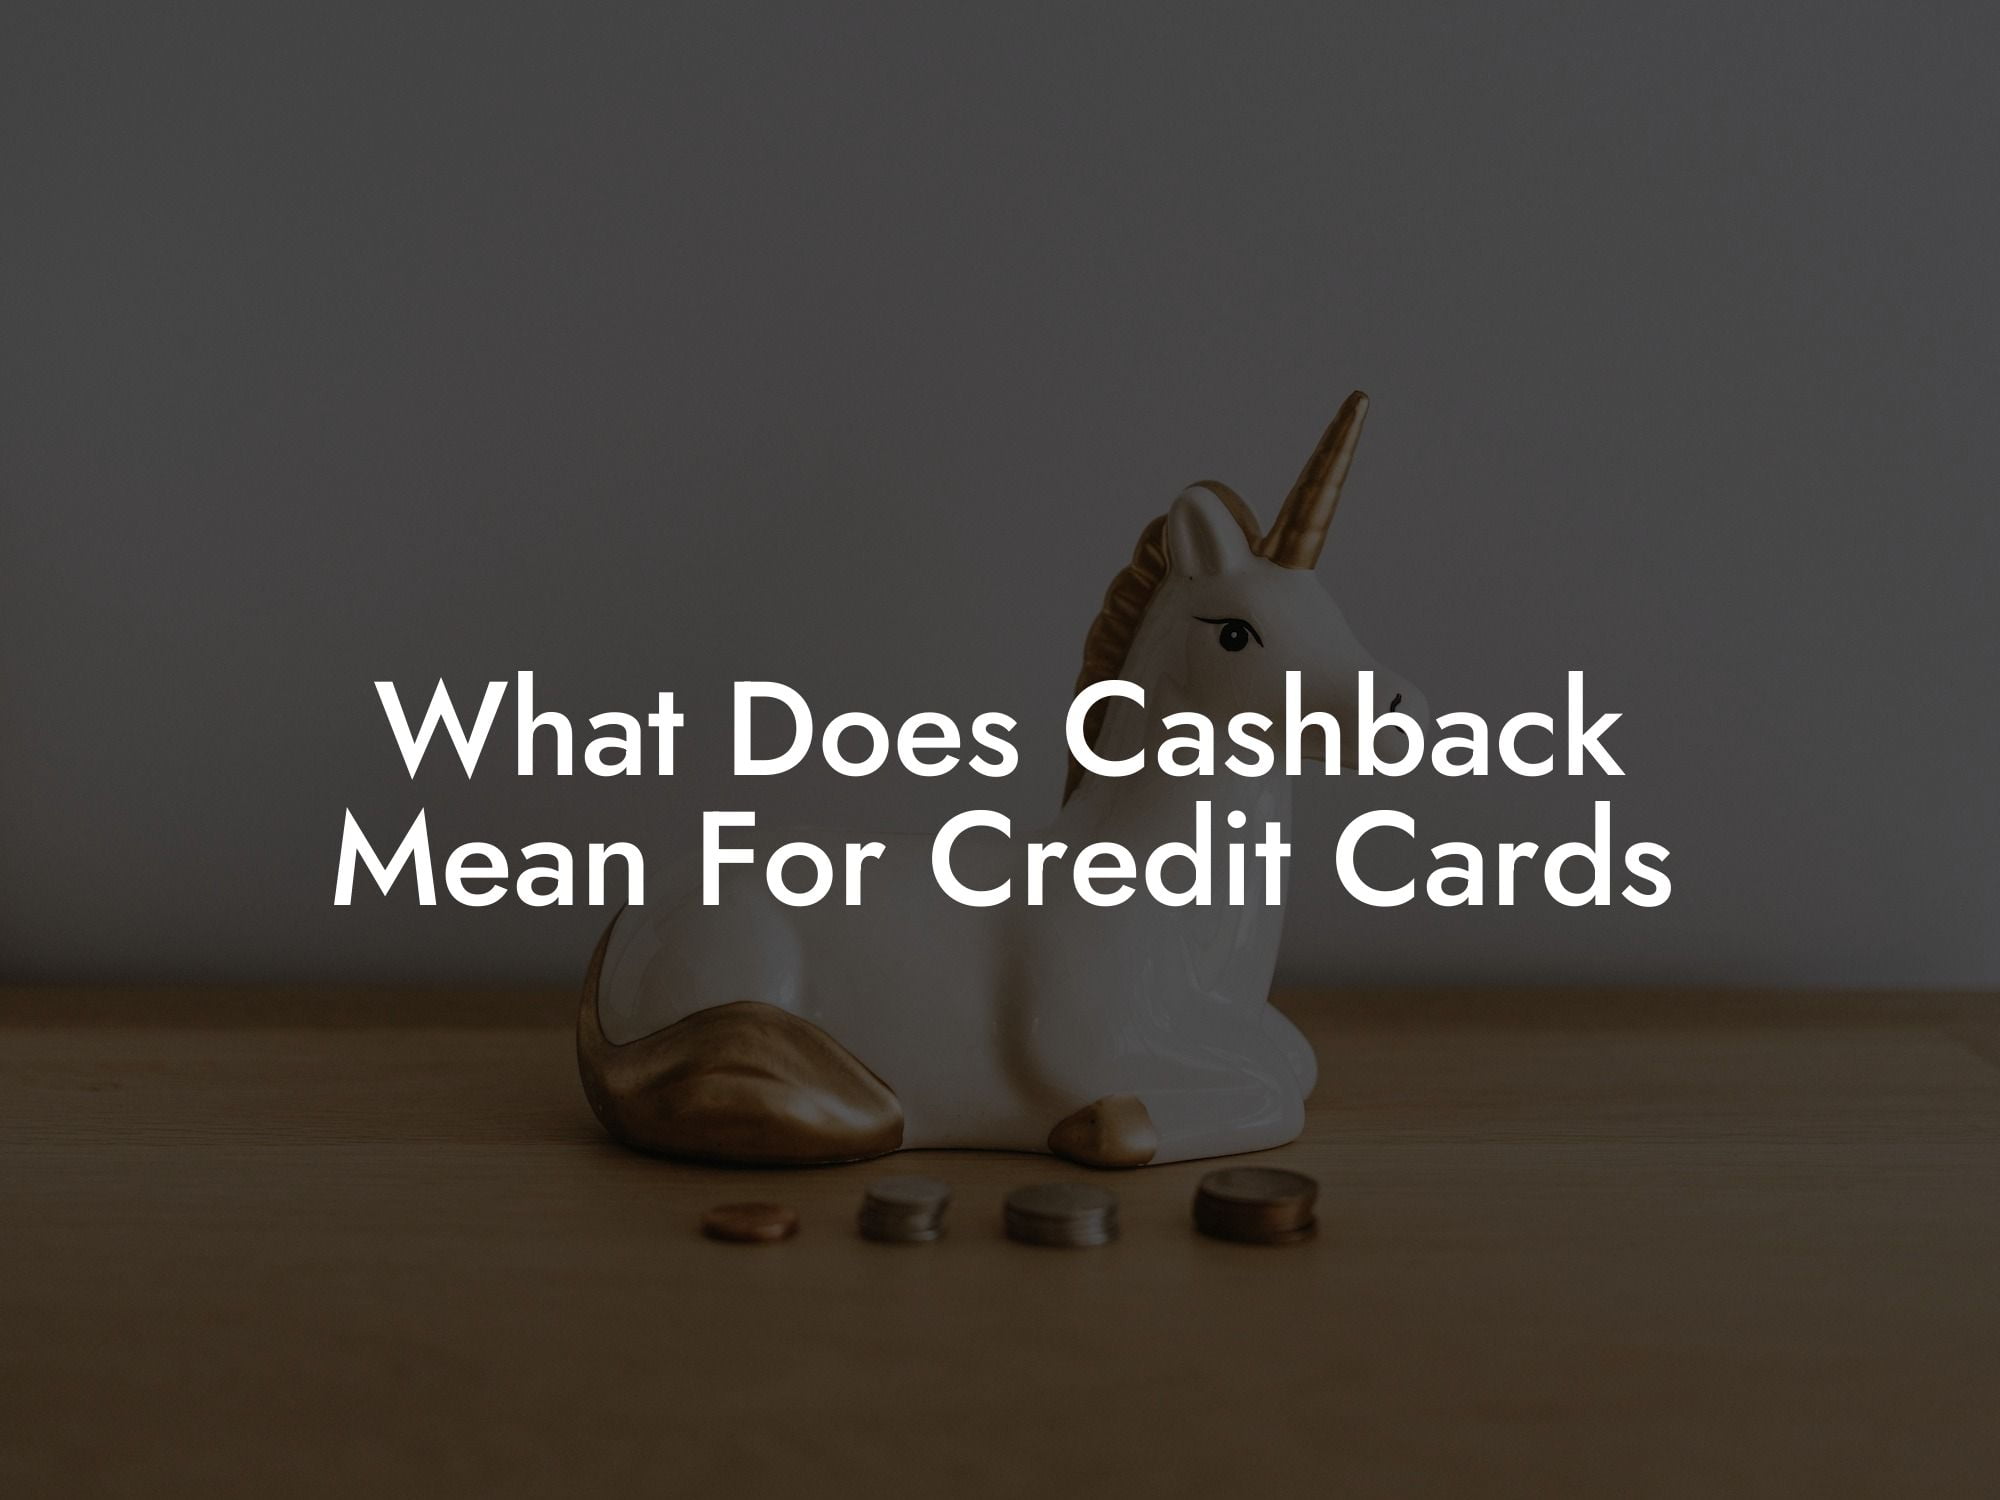 What Does Cashback Mean For Credit Cards